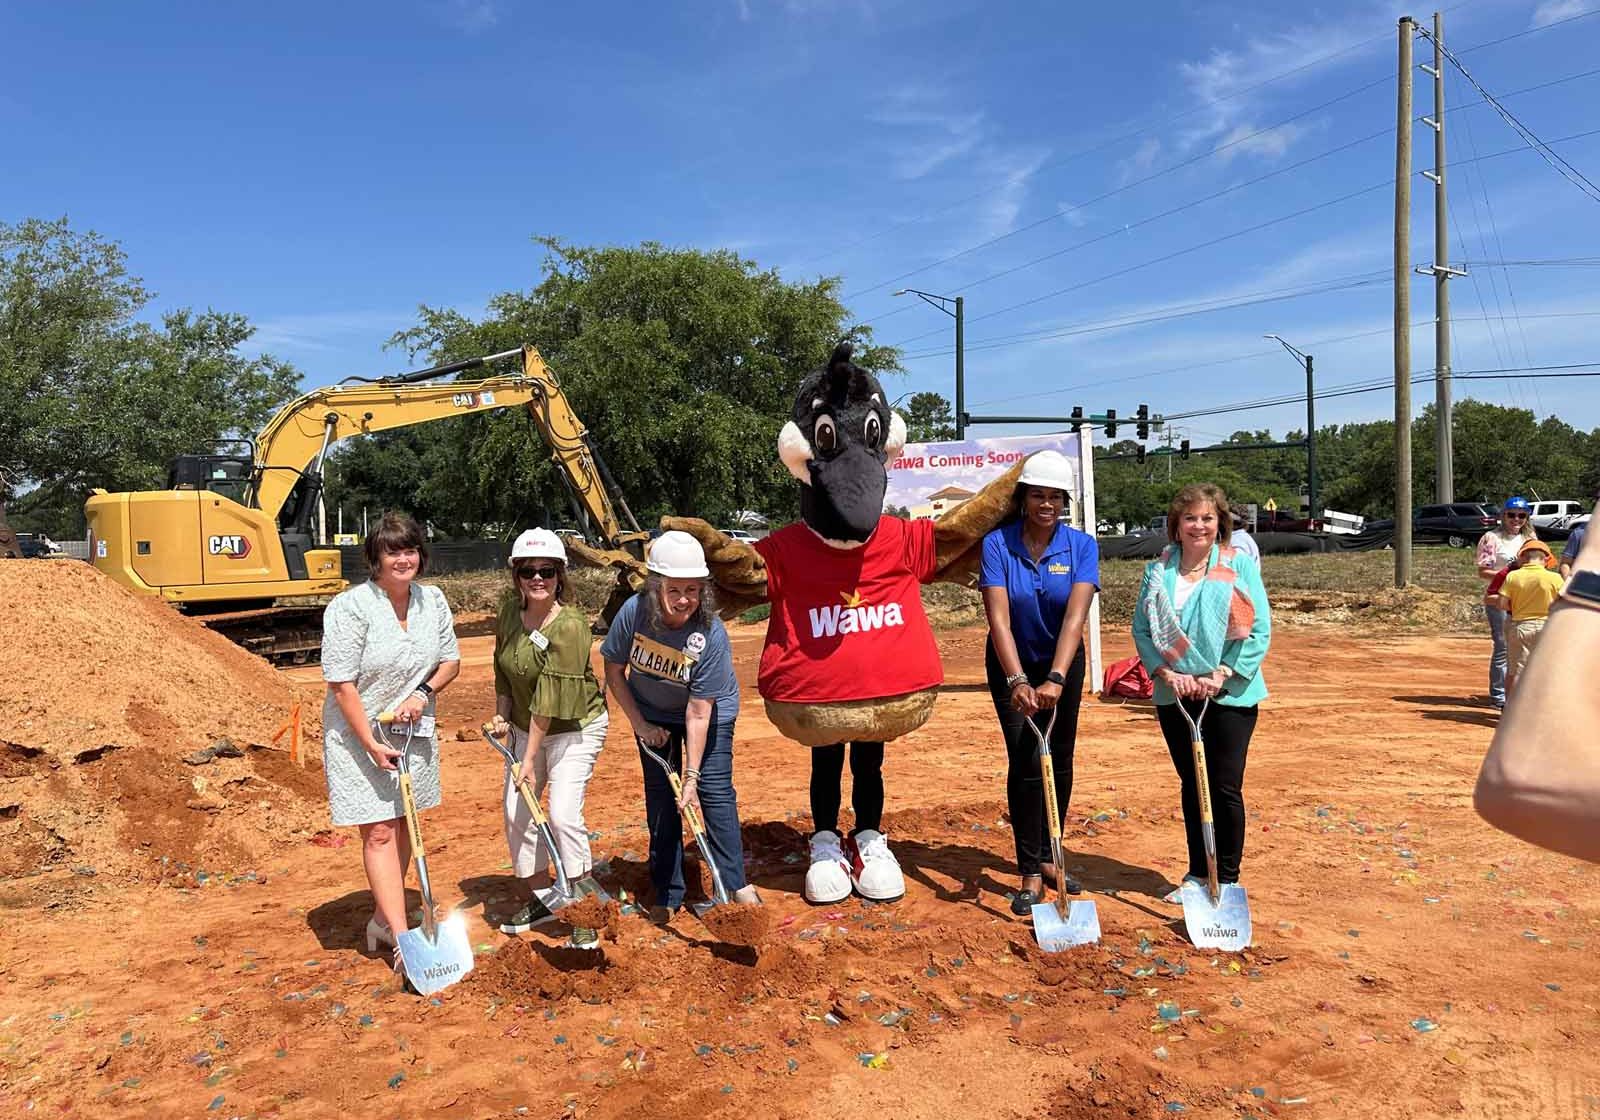 Wawa Holds Groundbreaking For First Alabama Store In Fairhope